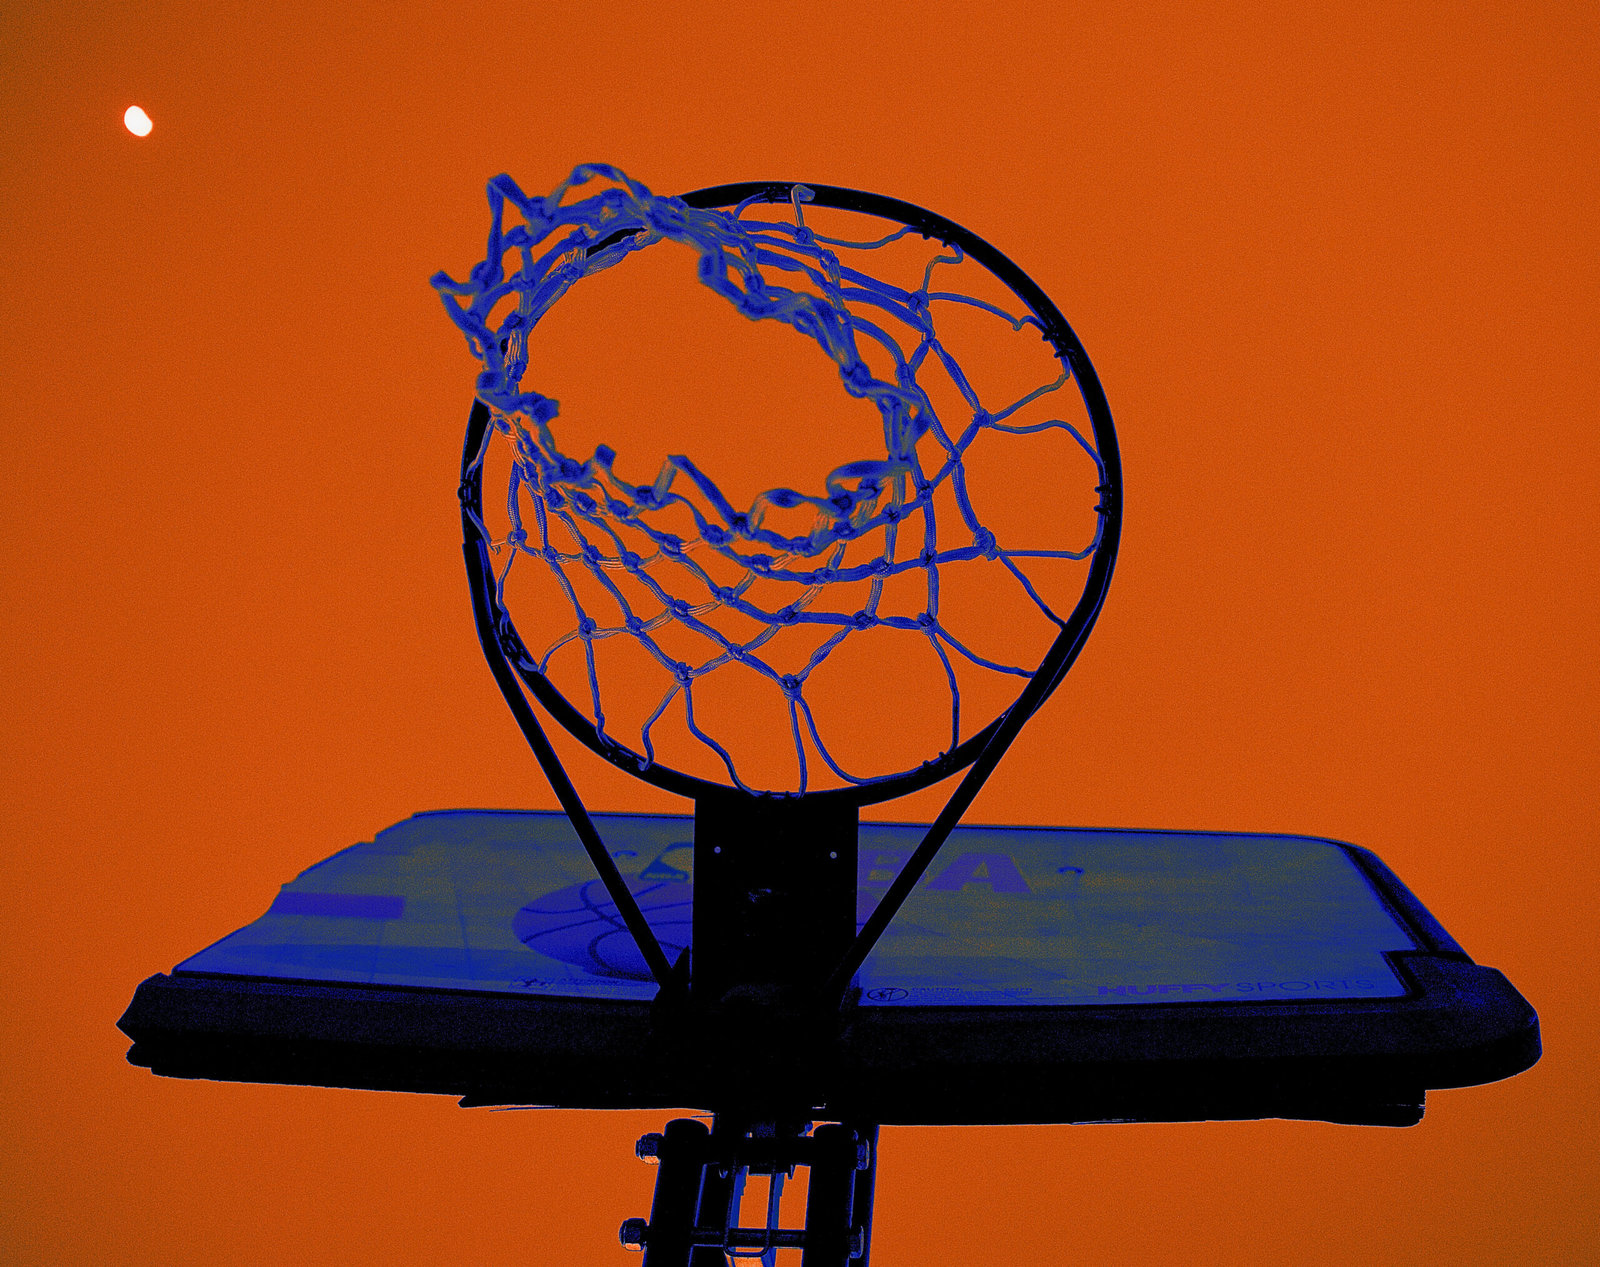 basketball net in orange and blue